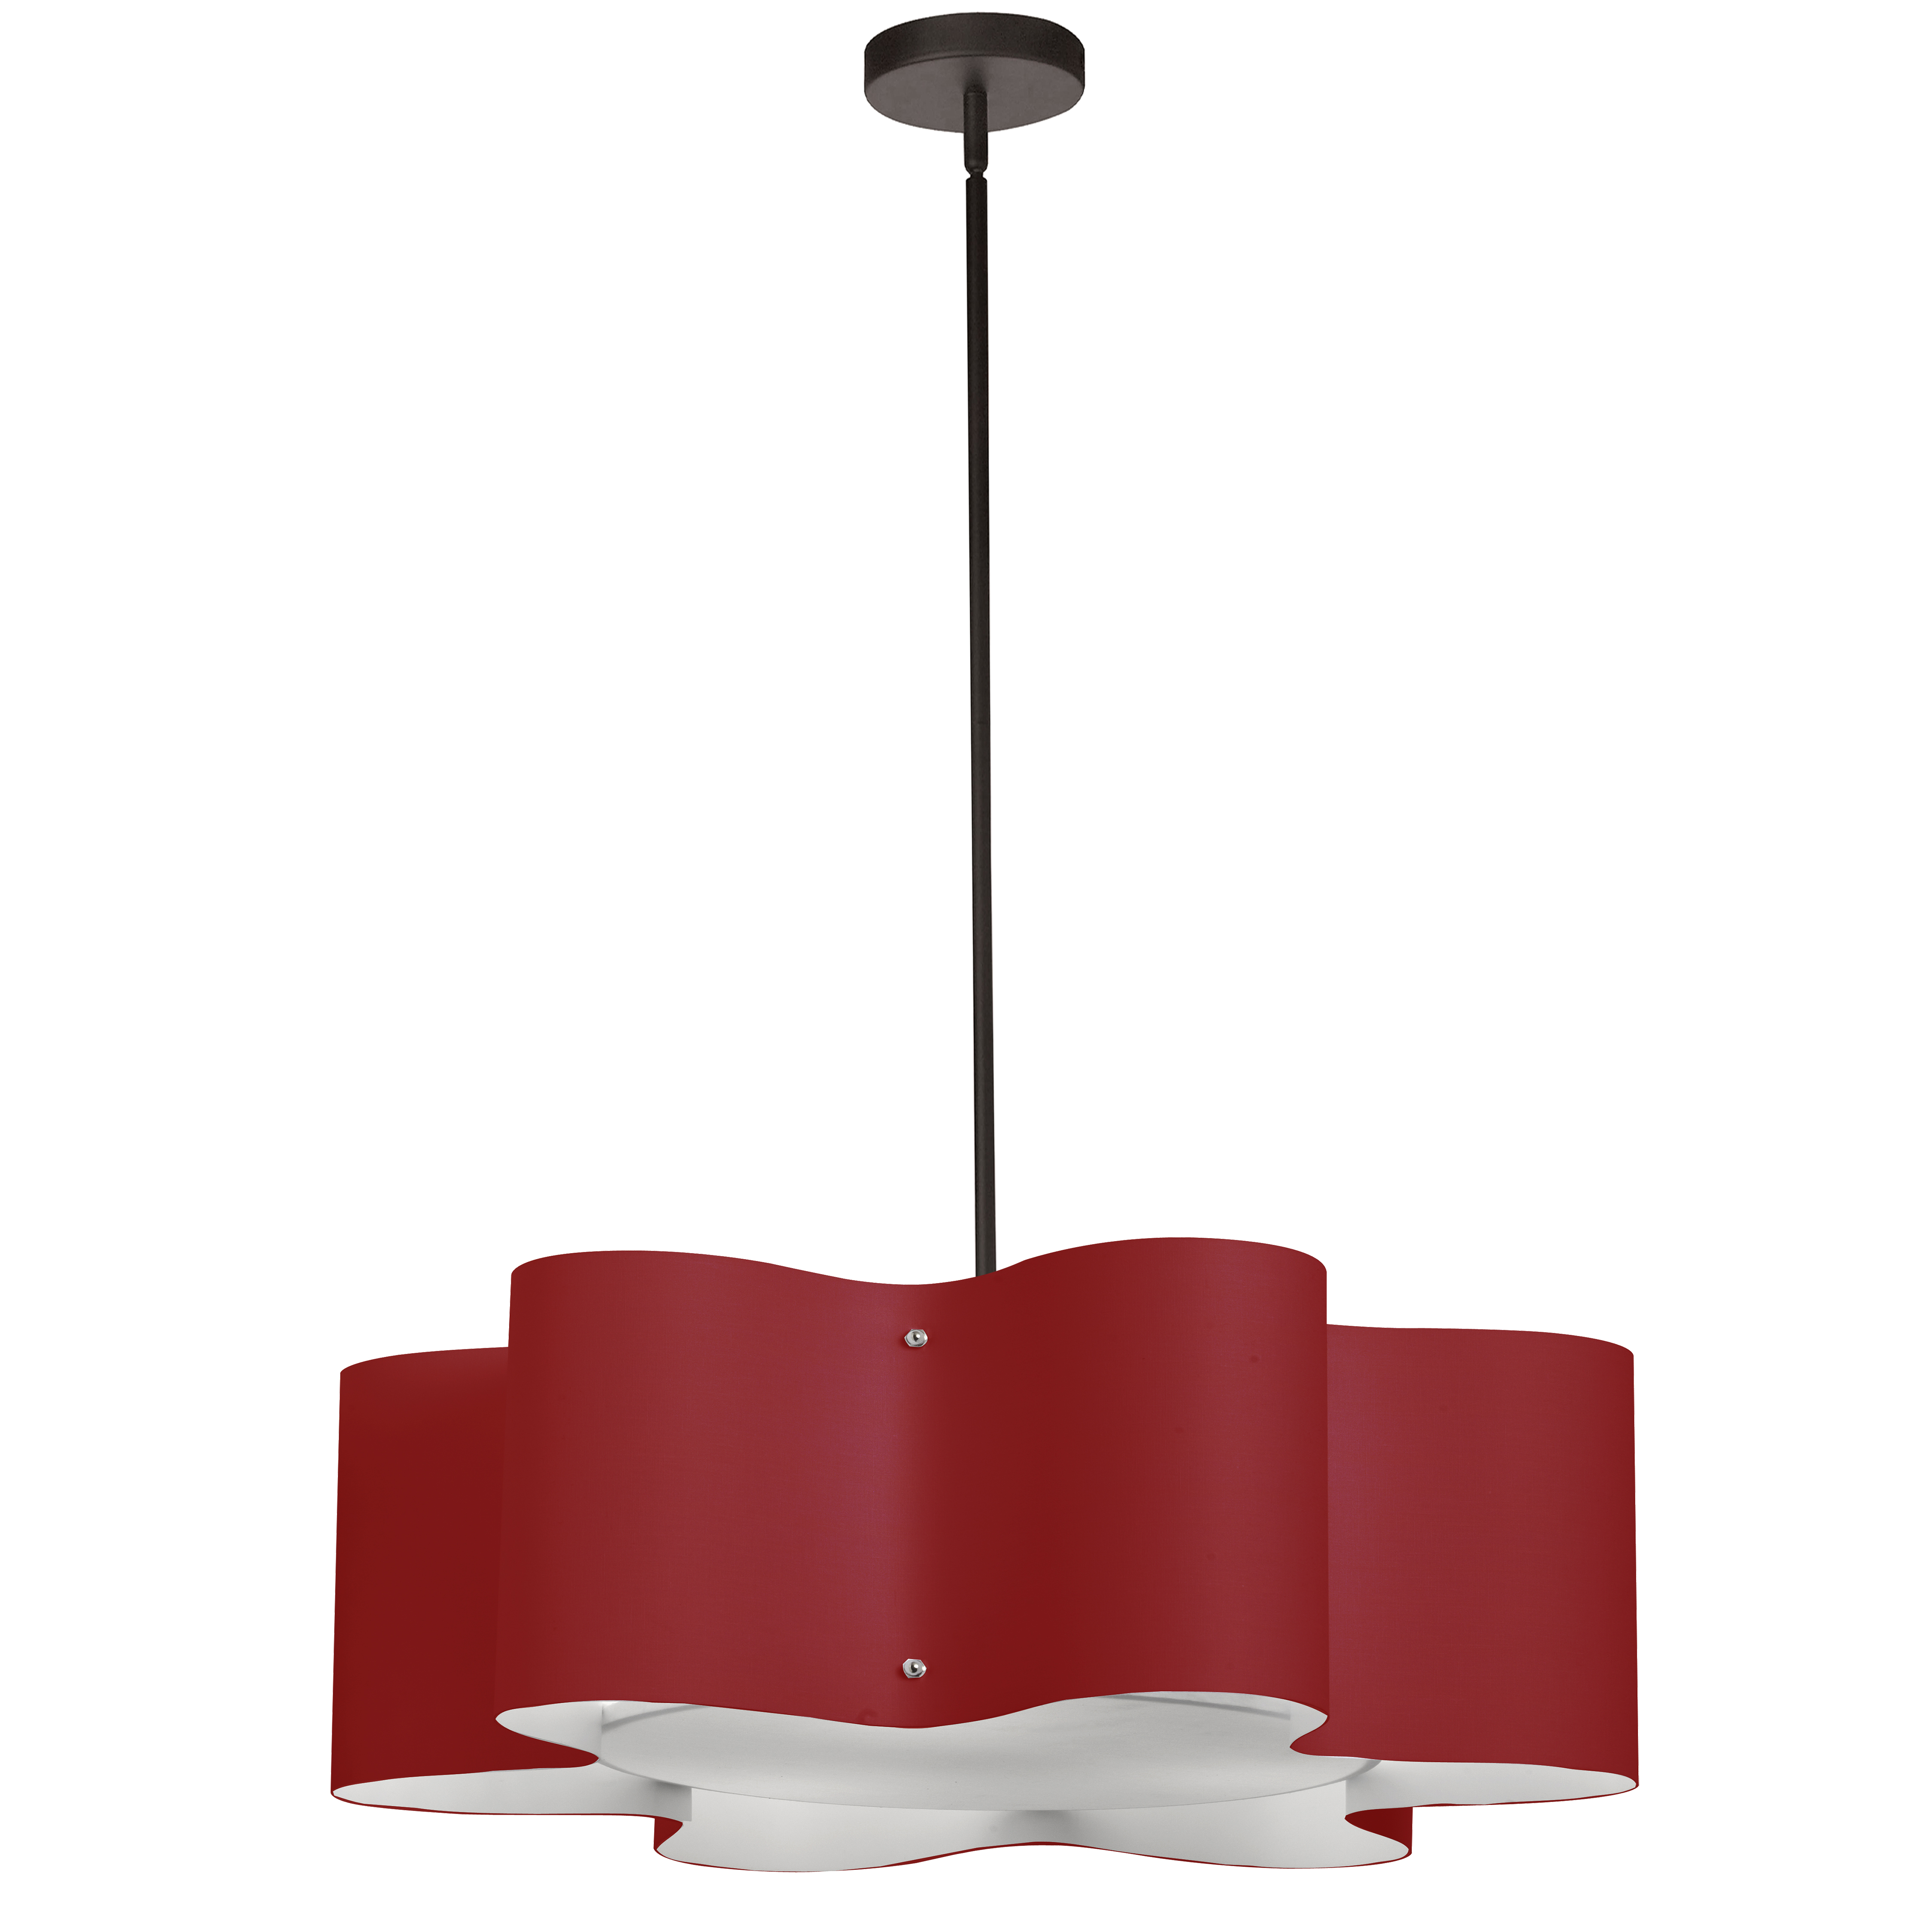 Youll add a bold and dramatic note to any room with the eye catching Zulu family of lighting. The design features a unique shade with six rounded edges over a circular fixture for a singular look.  The Zulu lighting design has elements of Pop Art appeal and will add a distinctive finish to any contemporary room from the kitchen to the bedroom and back to the living and dining rooms. Custom colour options include black and red shades in addition to neutral white for pendant lighting that adds much more than light to your home.